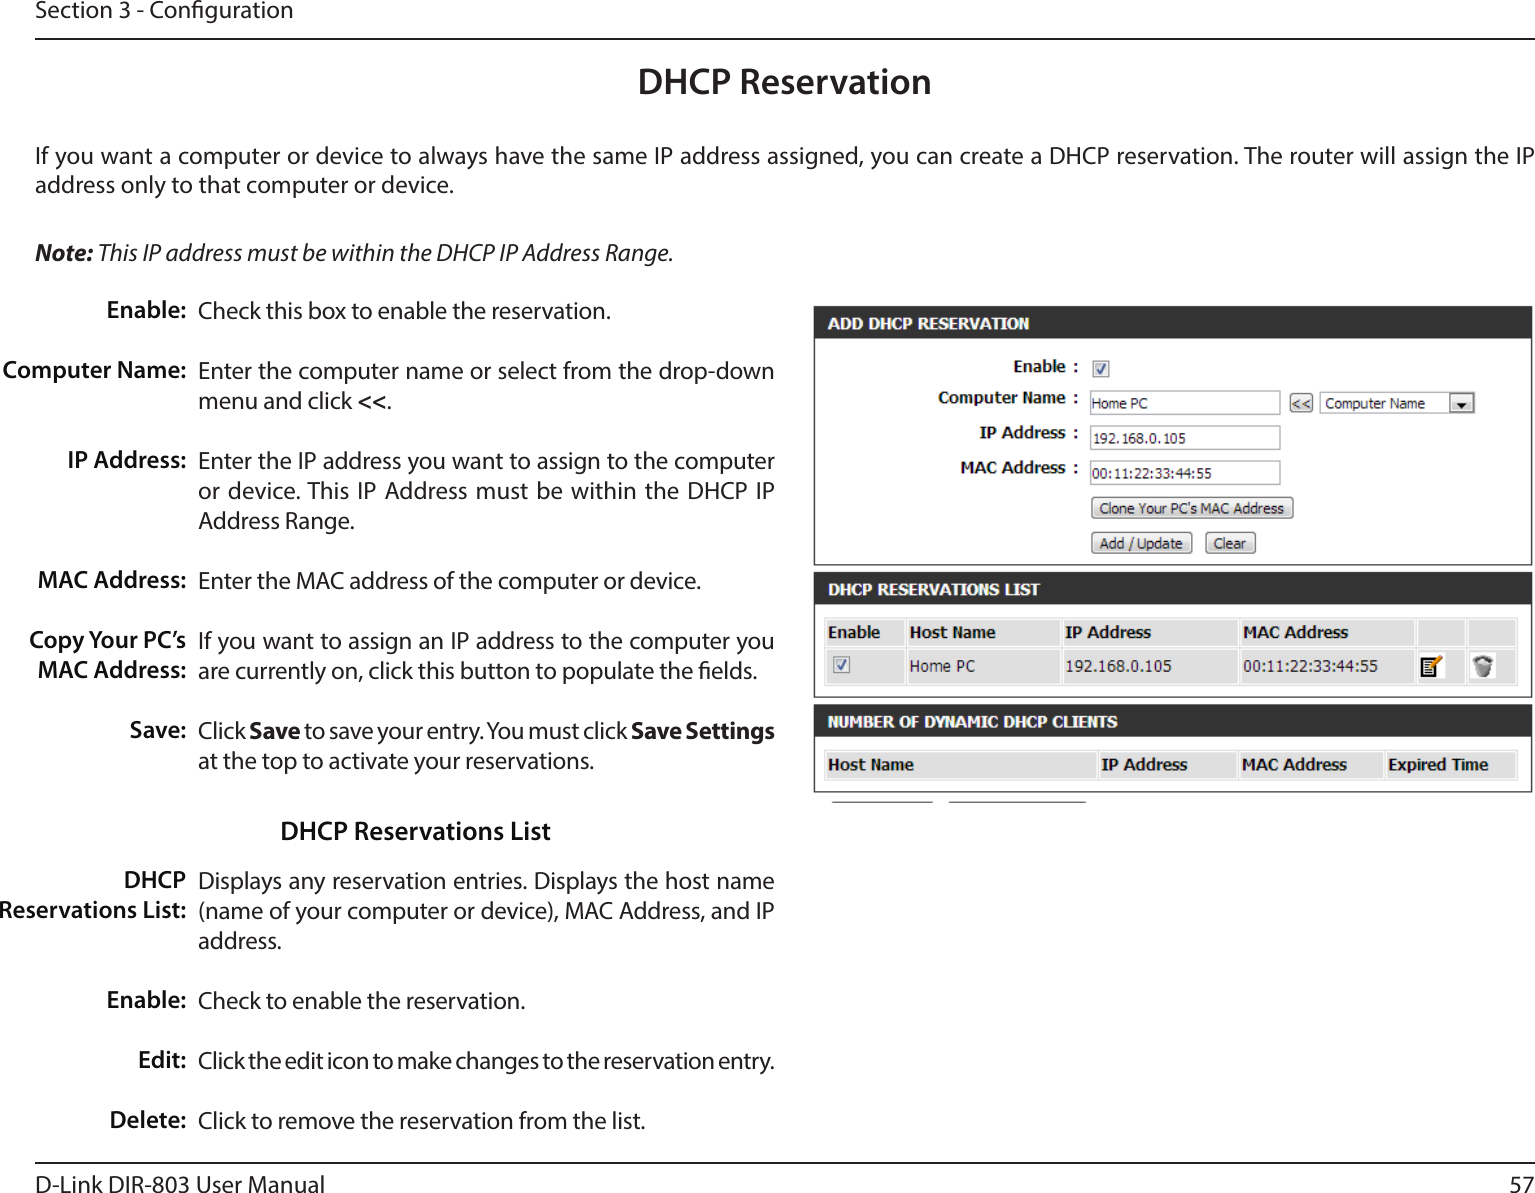 57D-Link DIR-803 User ManualSection 3 - CongurationDHCP ReservationIf you want a computer or device to always have the same IP address assigned, you can create a DHCP reservation. The router will assign the IP address only to that computer or device. Note: This IP address must be within the DHCP IP Address Range.Check this box to enable the reservation.Enter the computer name or select from the drop-down menu and click &lt;&lt;.Enter the IP address you want to assign to the computer or device. This IP Address must be within the DHCP IP Address Range.Enter the MAC address of the computer or device.If you want to assign an IP address to the computer you are currently on, click this button to populate the elds. Click Save to save your entry. You must click Save Settings at the top to activate your reservations. Displays any reservation entries. Displays the host name (name of your computer or device), MAC Address, and IP address.Check to enable the reservation.Click the edit icon to make changes to the reservation entry.Click to remove the reservation from the list.Enable:Computer Name:IP Address:MAC Address:Copy Your PC’s MAC Address:Save:DHCP Reservations List:Enable:Edit:Delete:DHCP Reservations List